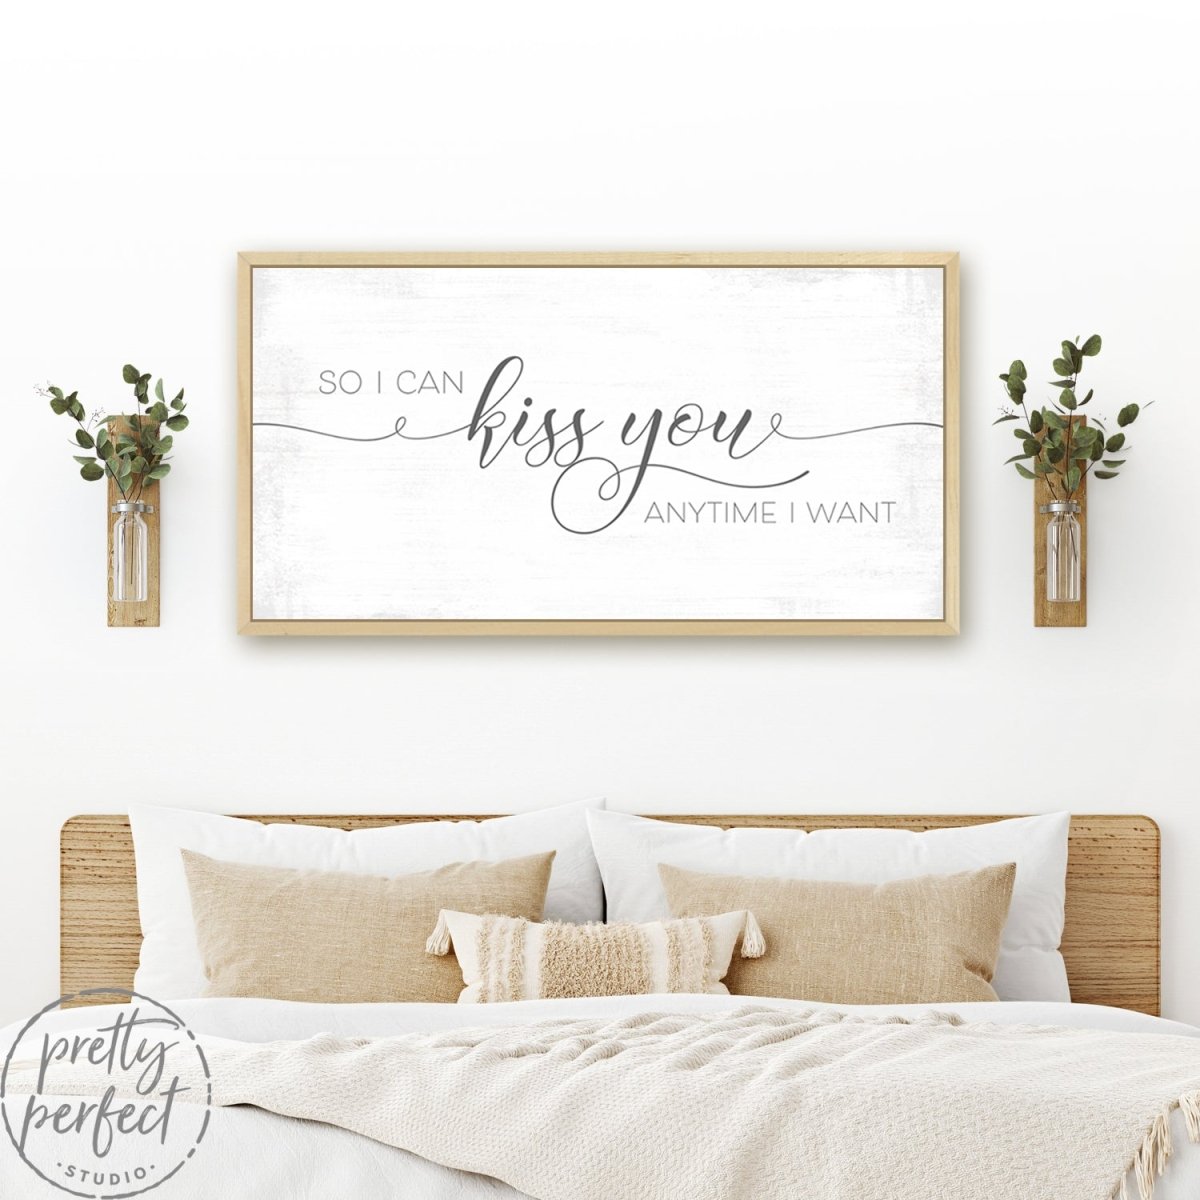 So I Can Kiss You Anytime I Want Sign Above Bed - Pretty Perfect Studio